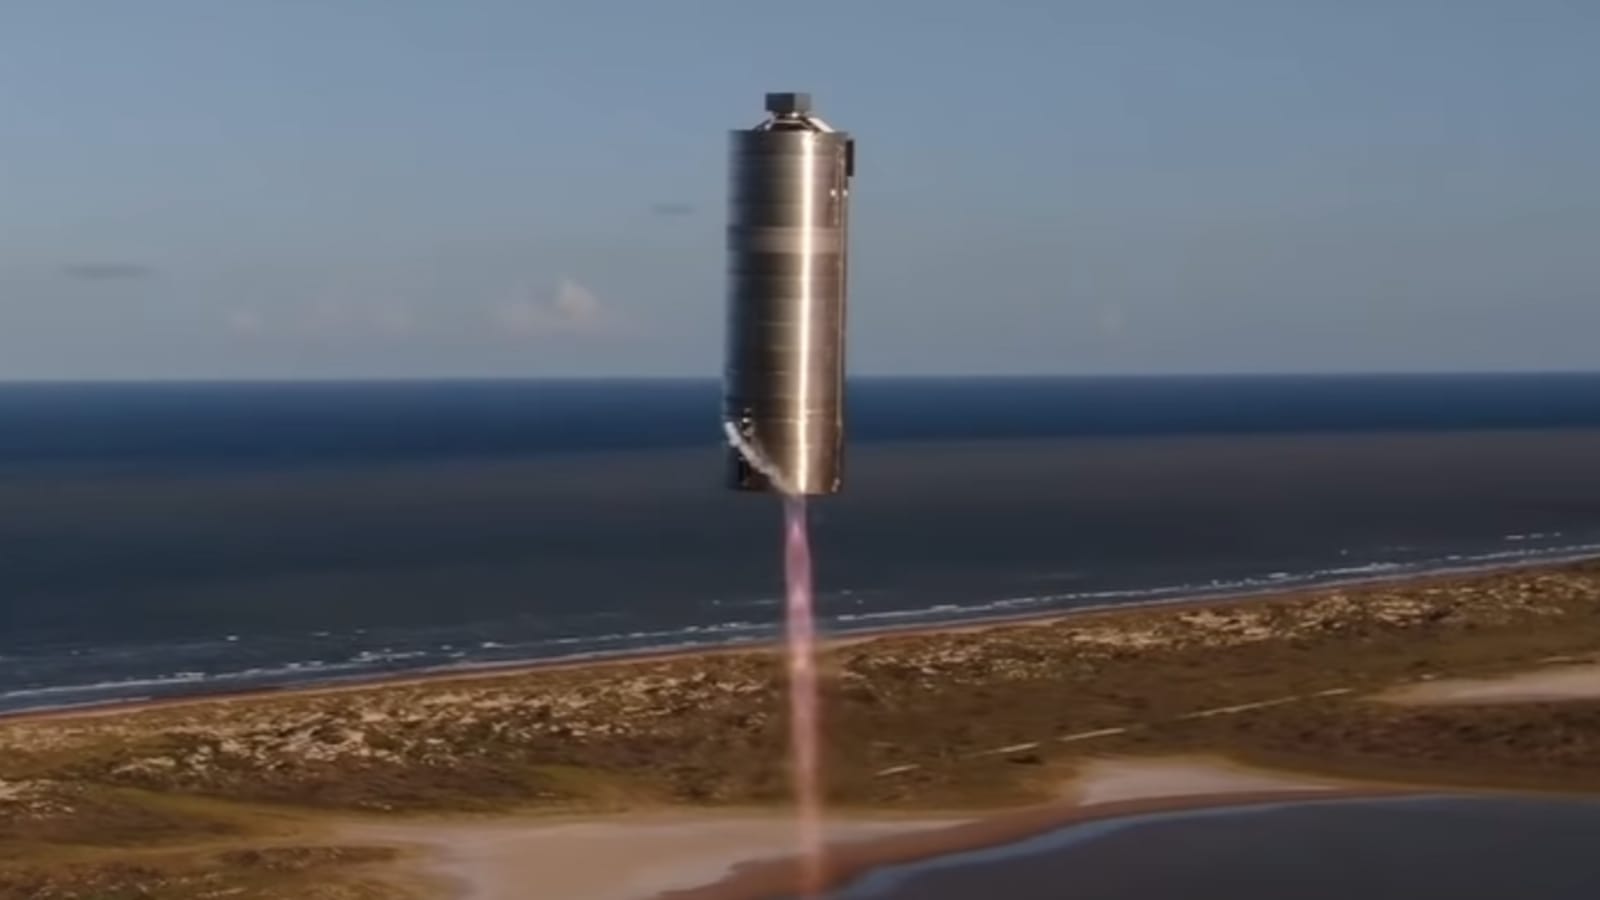 SpaceX launches, lands Starship prototype rocket in short flight test